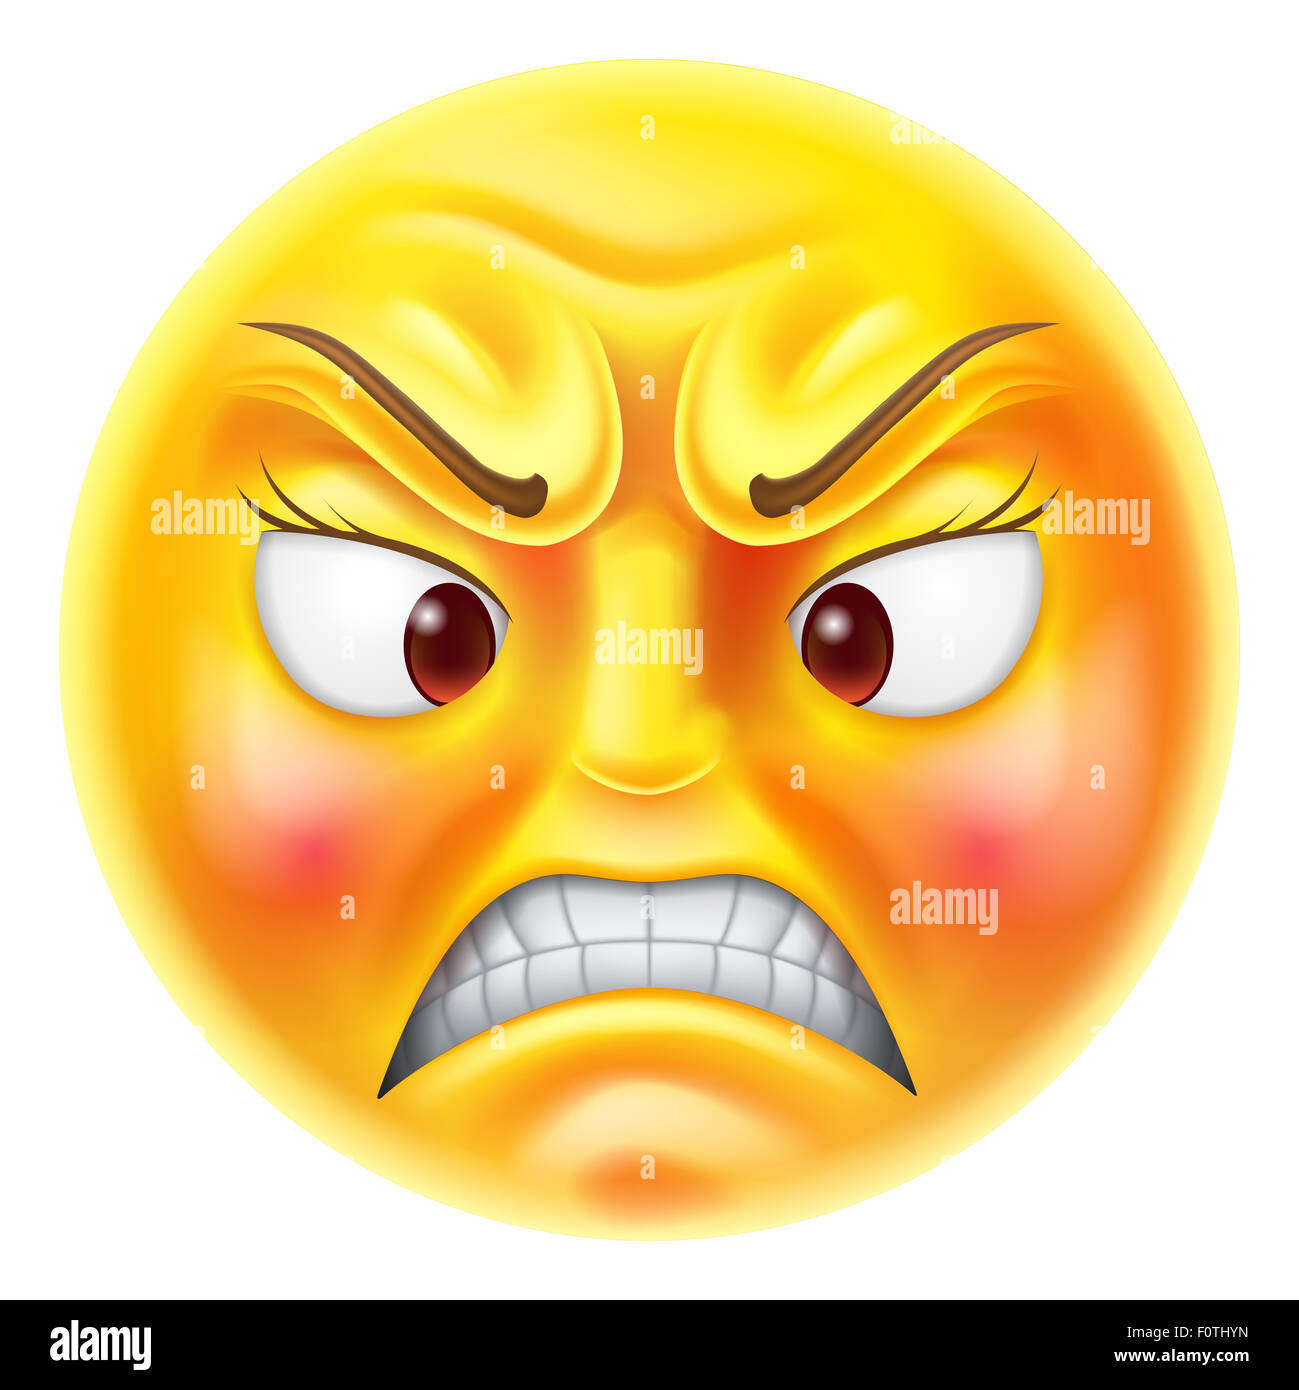 Angry or furious looking red faced emoticon emoji character Stock Photo